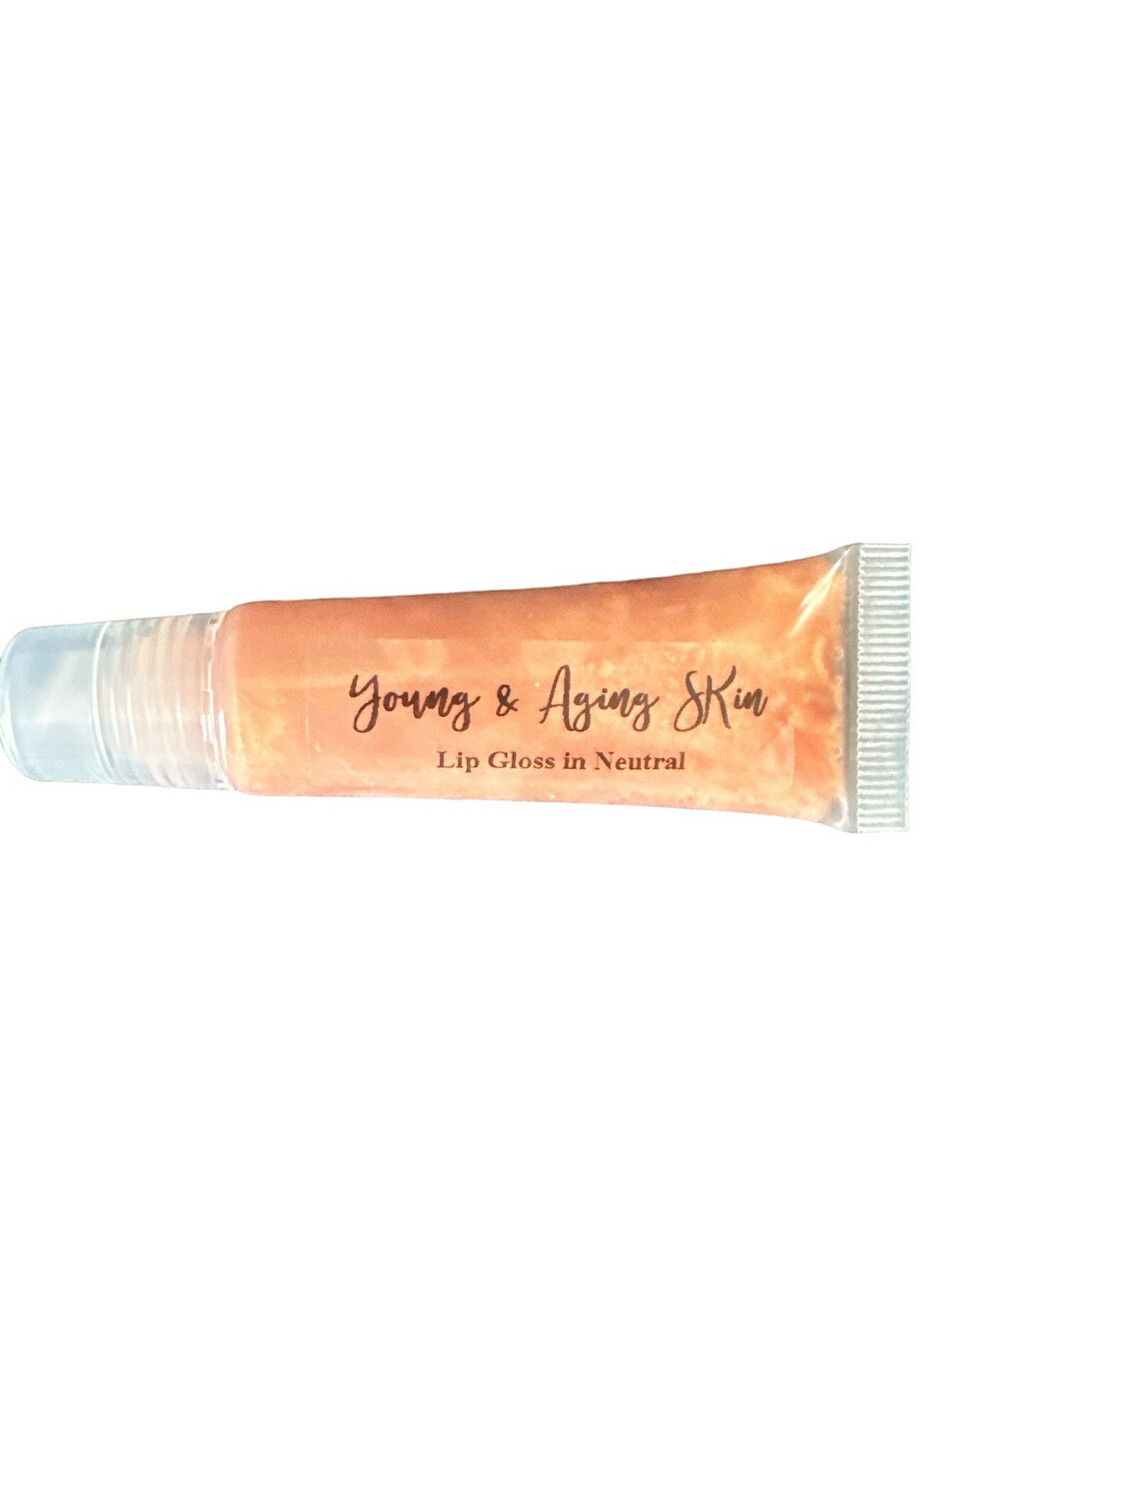 Shiny Shimmer Lipgloss in Neutral By Young & Aging Skin